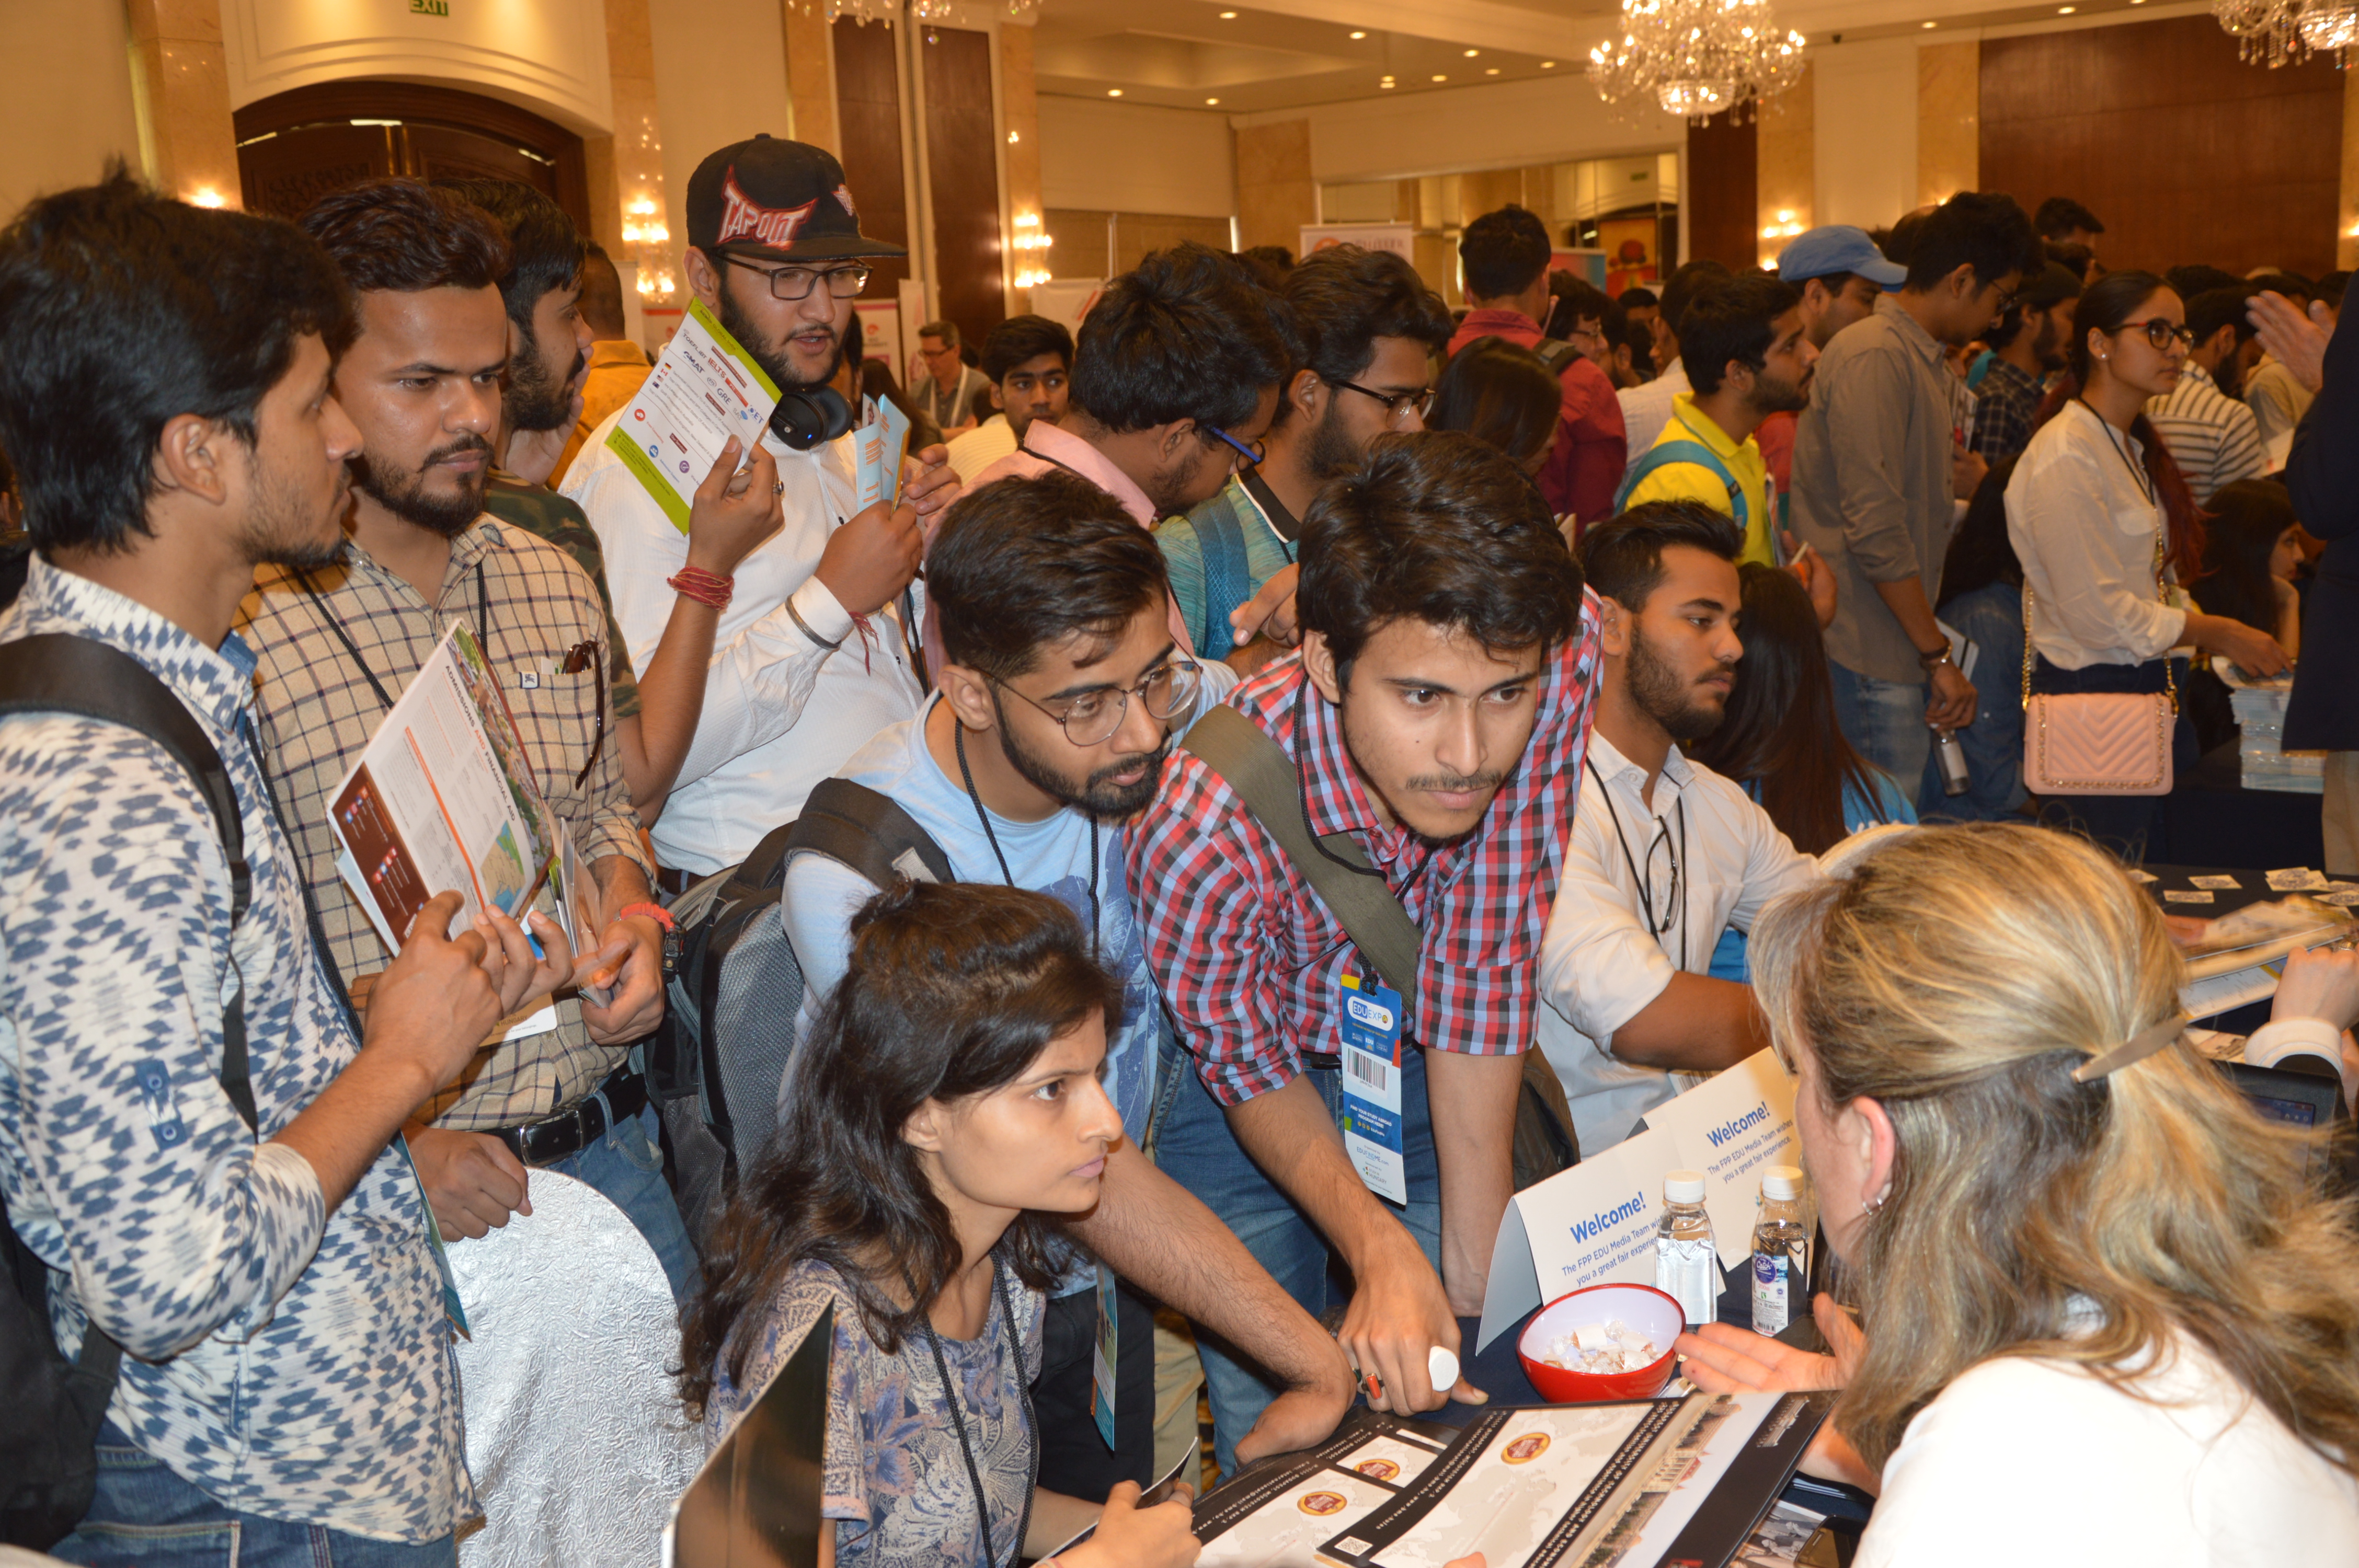 The education fair roadshow in India proved again that many students from all over the world would love to study in Hungary.